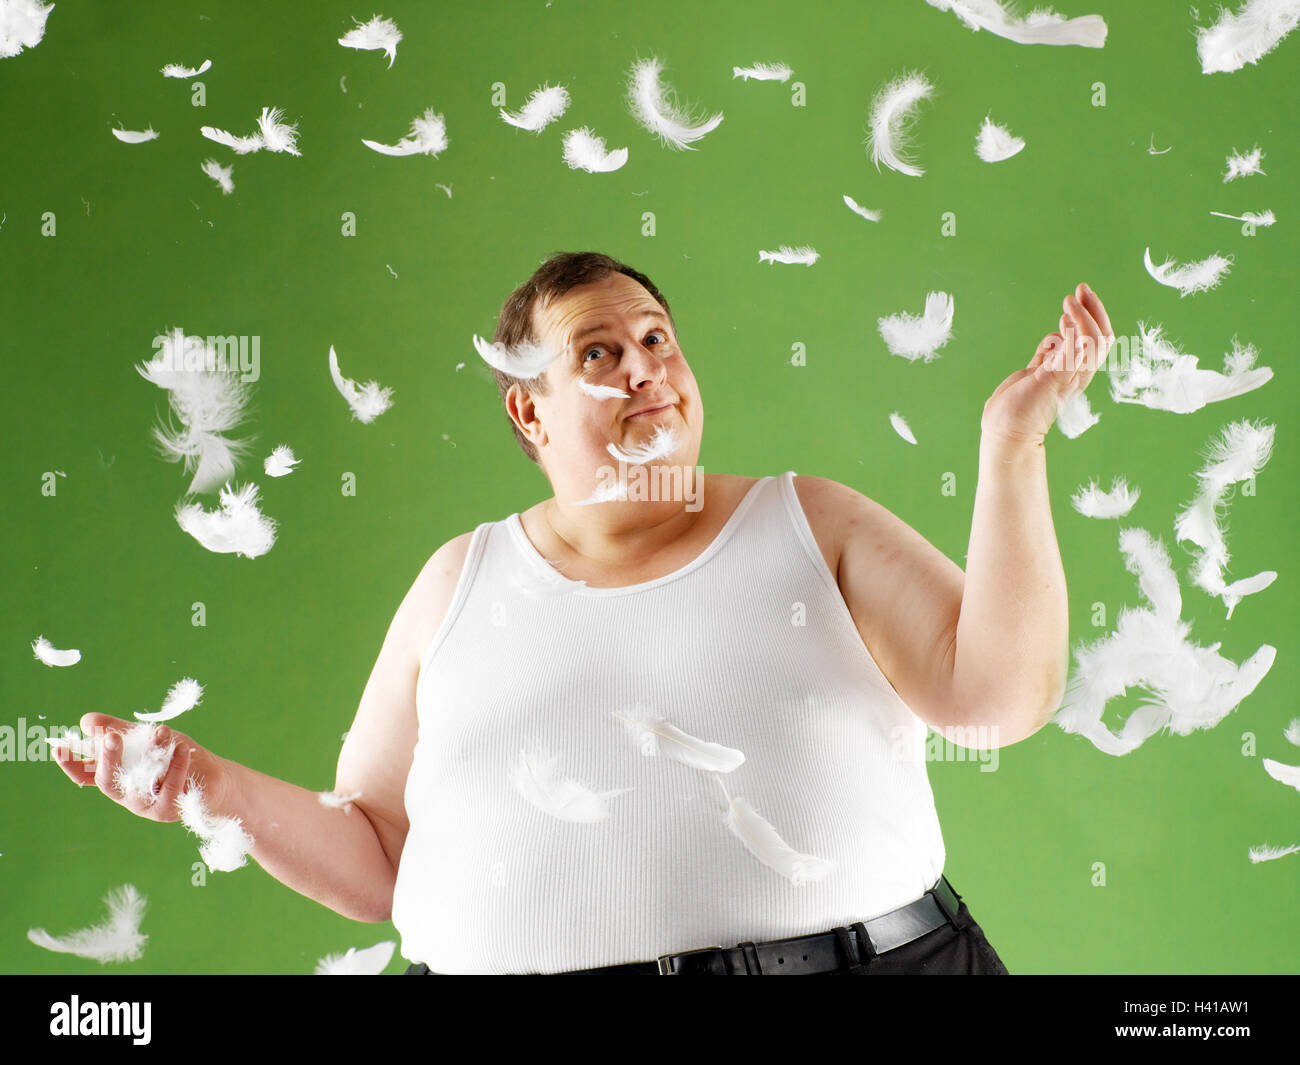 Man, vest, half portrait, feathers, fall down middle old person, happy, gesture, thickly, bold, overweight, fat, fatly, adiposity, obesity, obesity, voluminously, seriously, body weight, weight, contrast, contrast, difference, down feathers, downs, small, Stock Photo